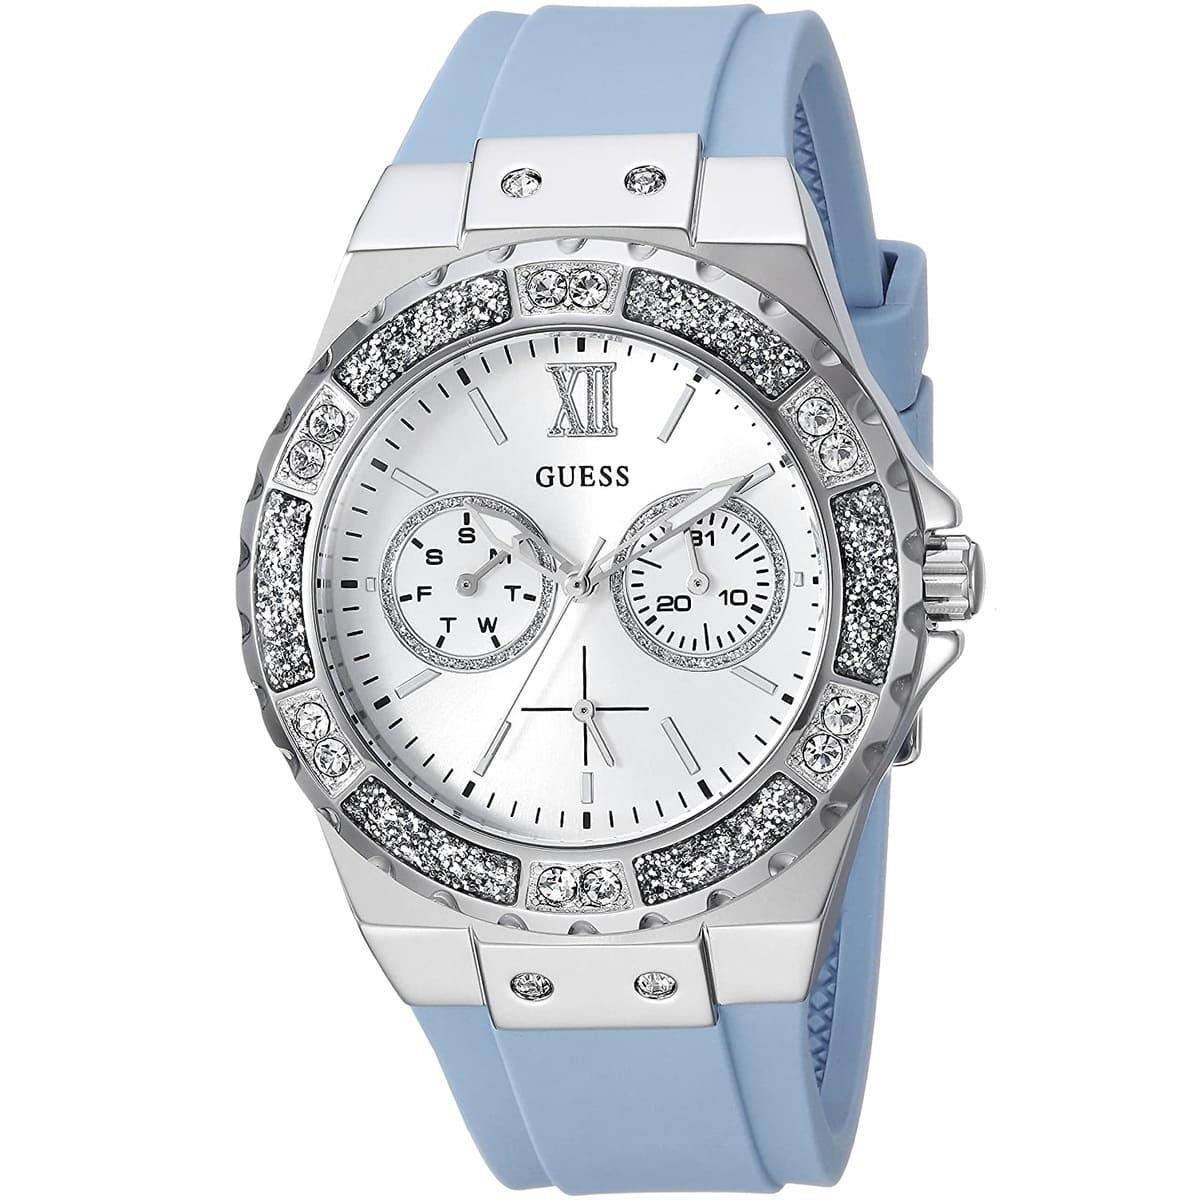 ĐỒNG HỒ NỮ GUESS BLUE SILICON LIMELIGHT WOMEN WATCH W1053L5 6